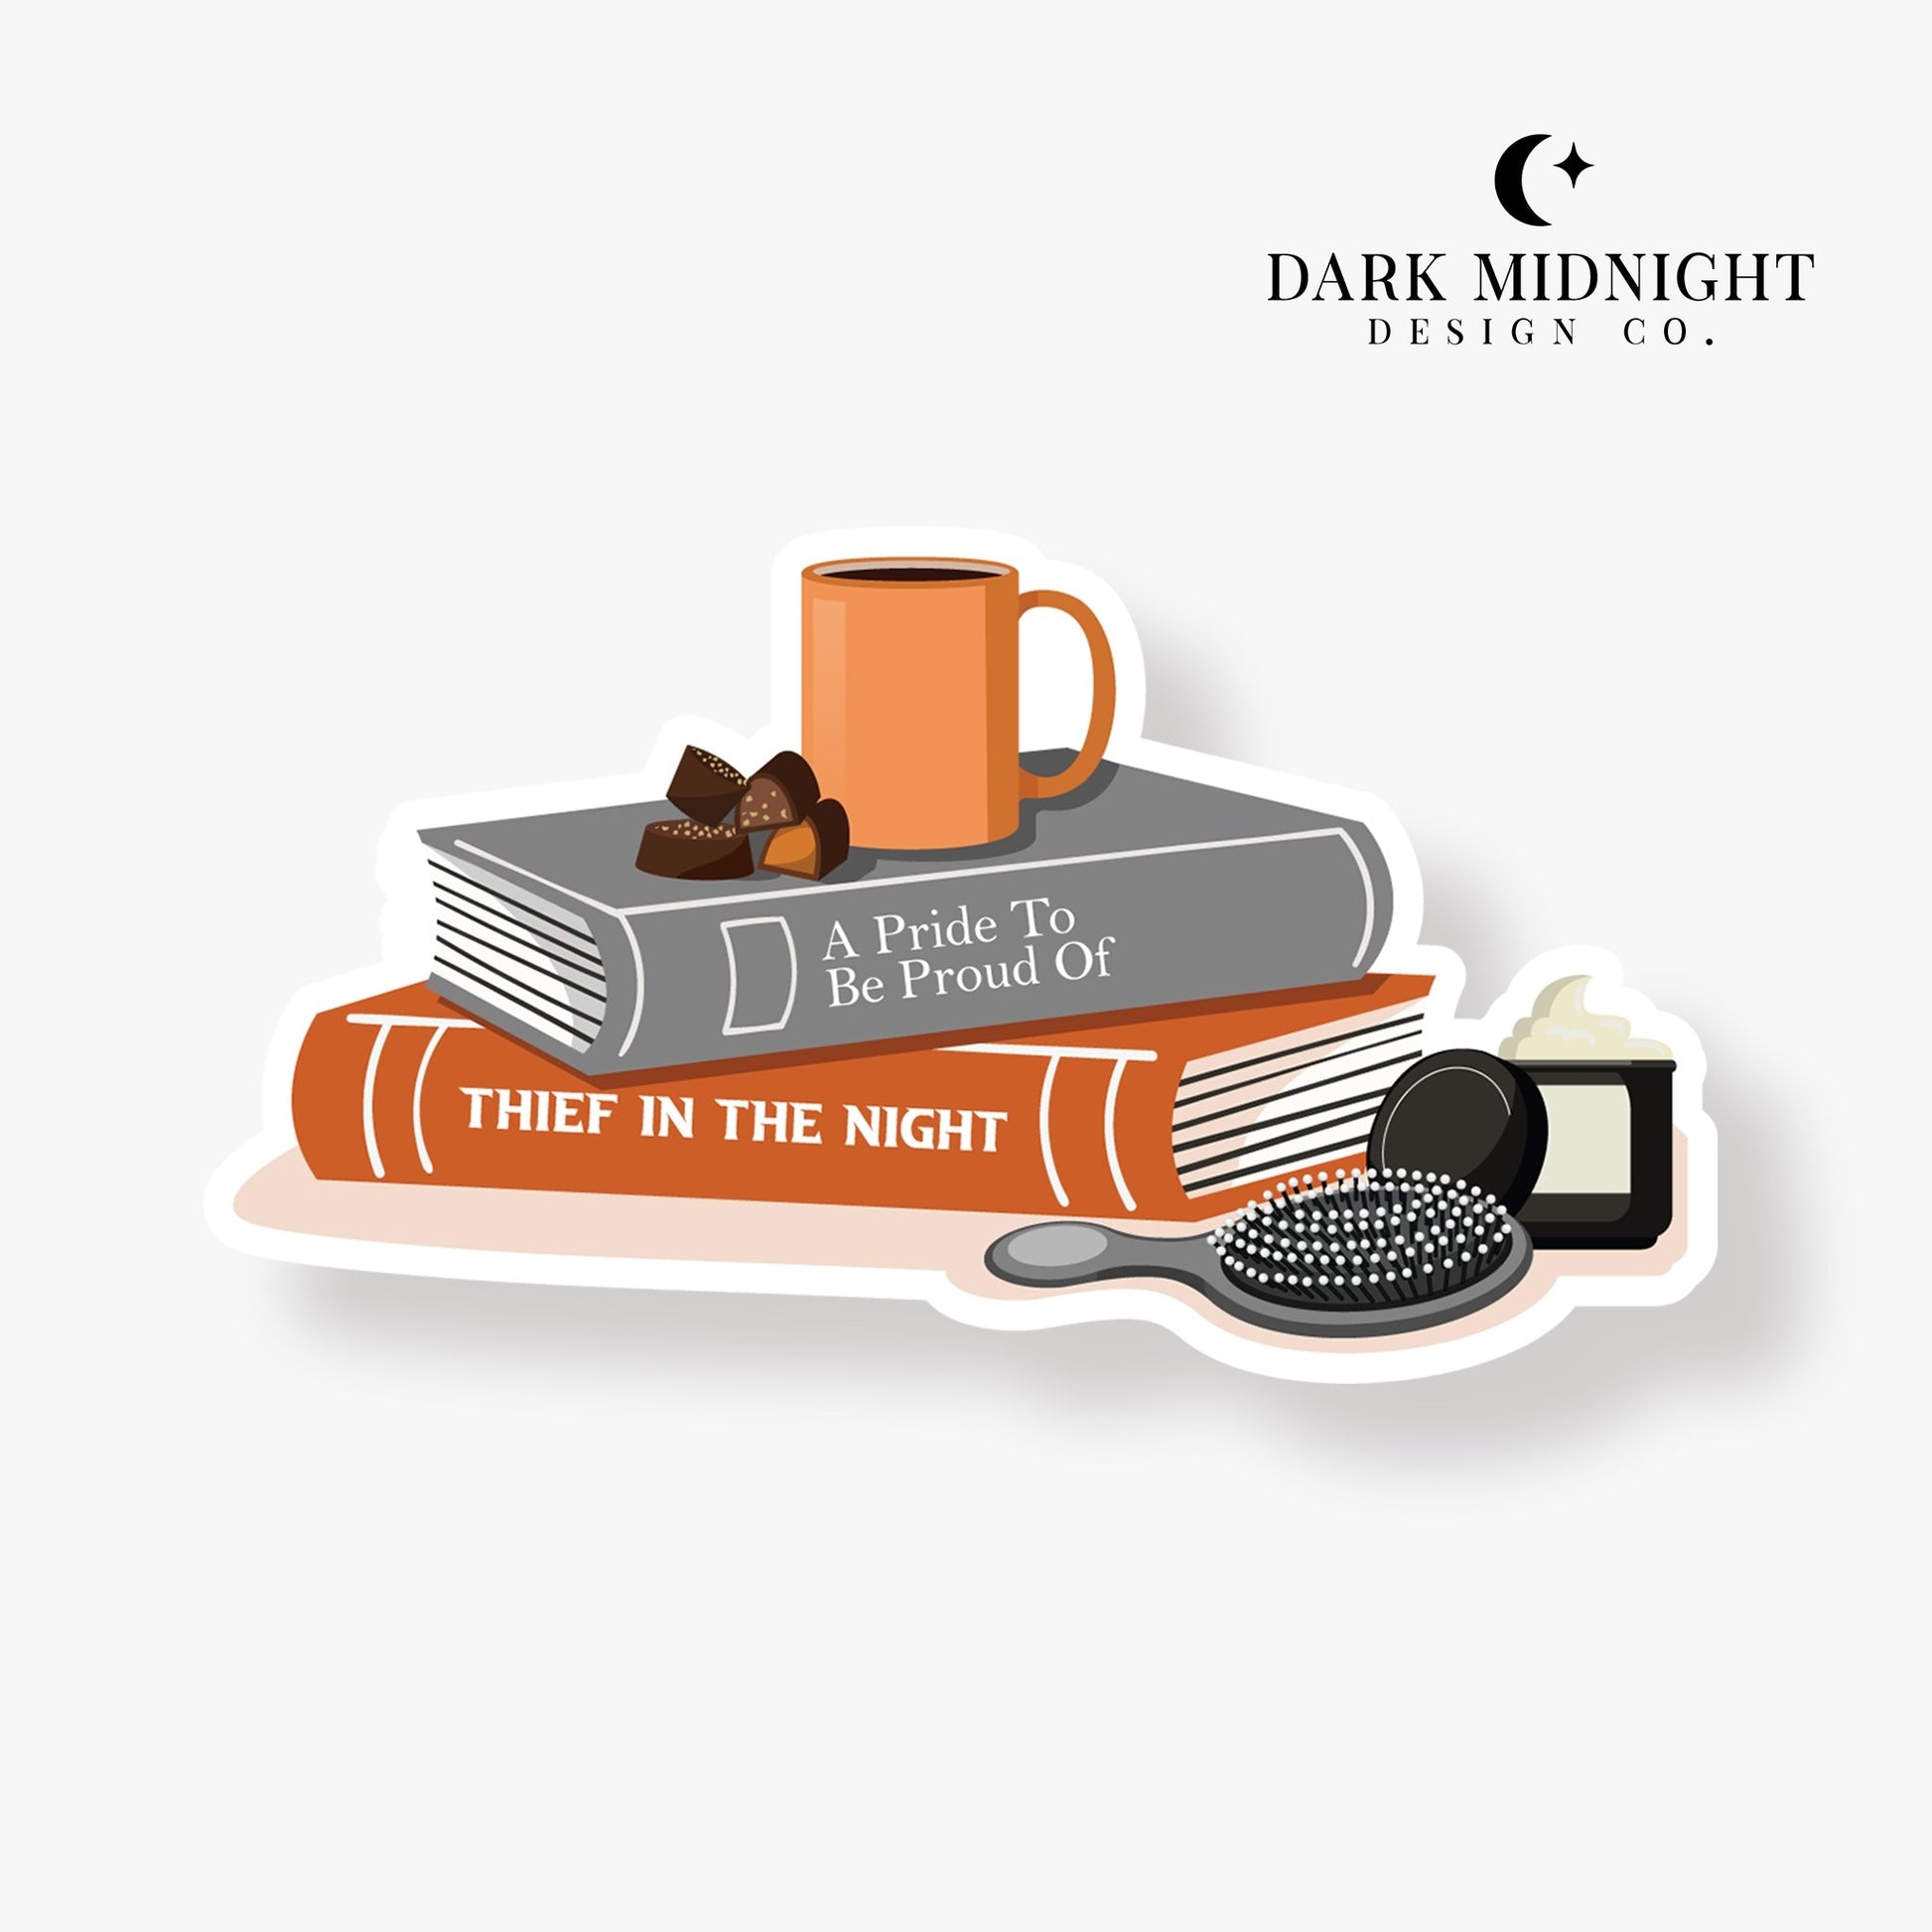 Character Anthology Sticker - Roary Night - Officially Licensed Darkmore Penitentiary Sticker - Dark Midnight Design Co